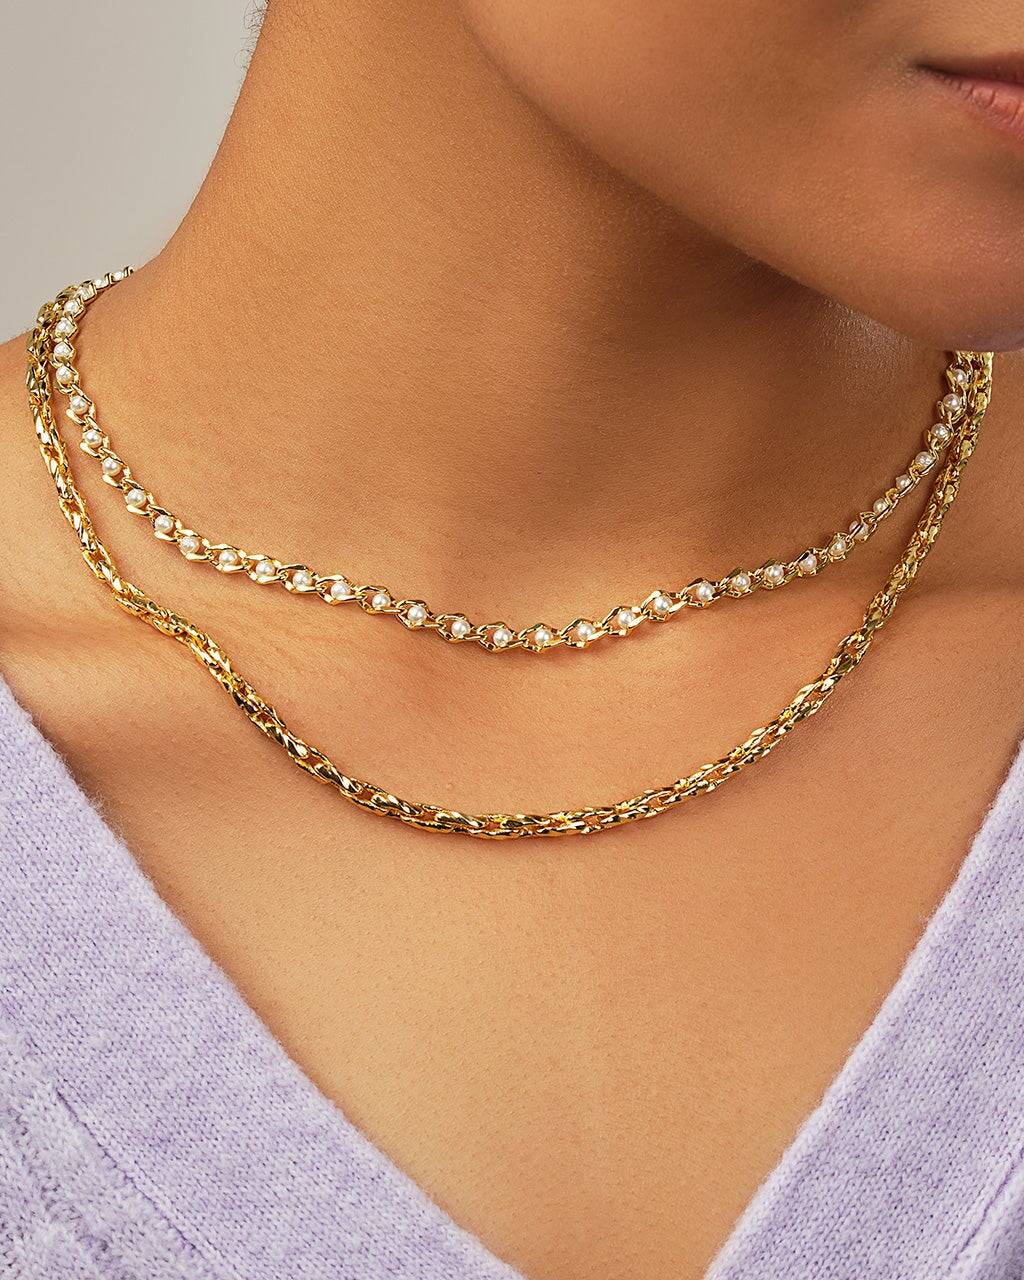 Amedea Layered Necklace Necklace Sterling Forever 